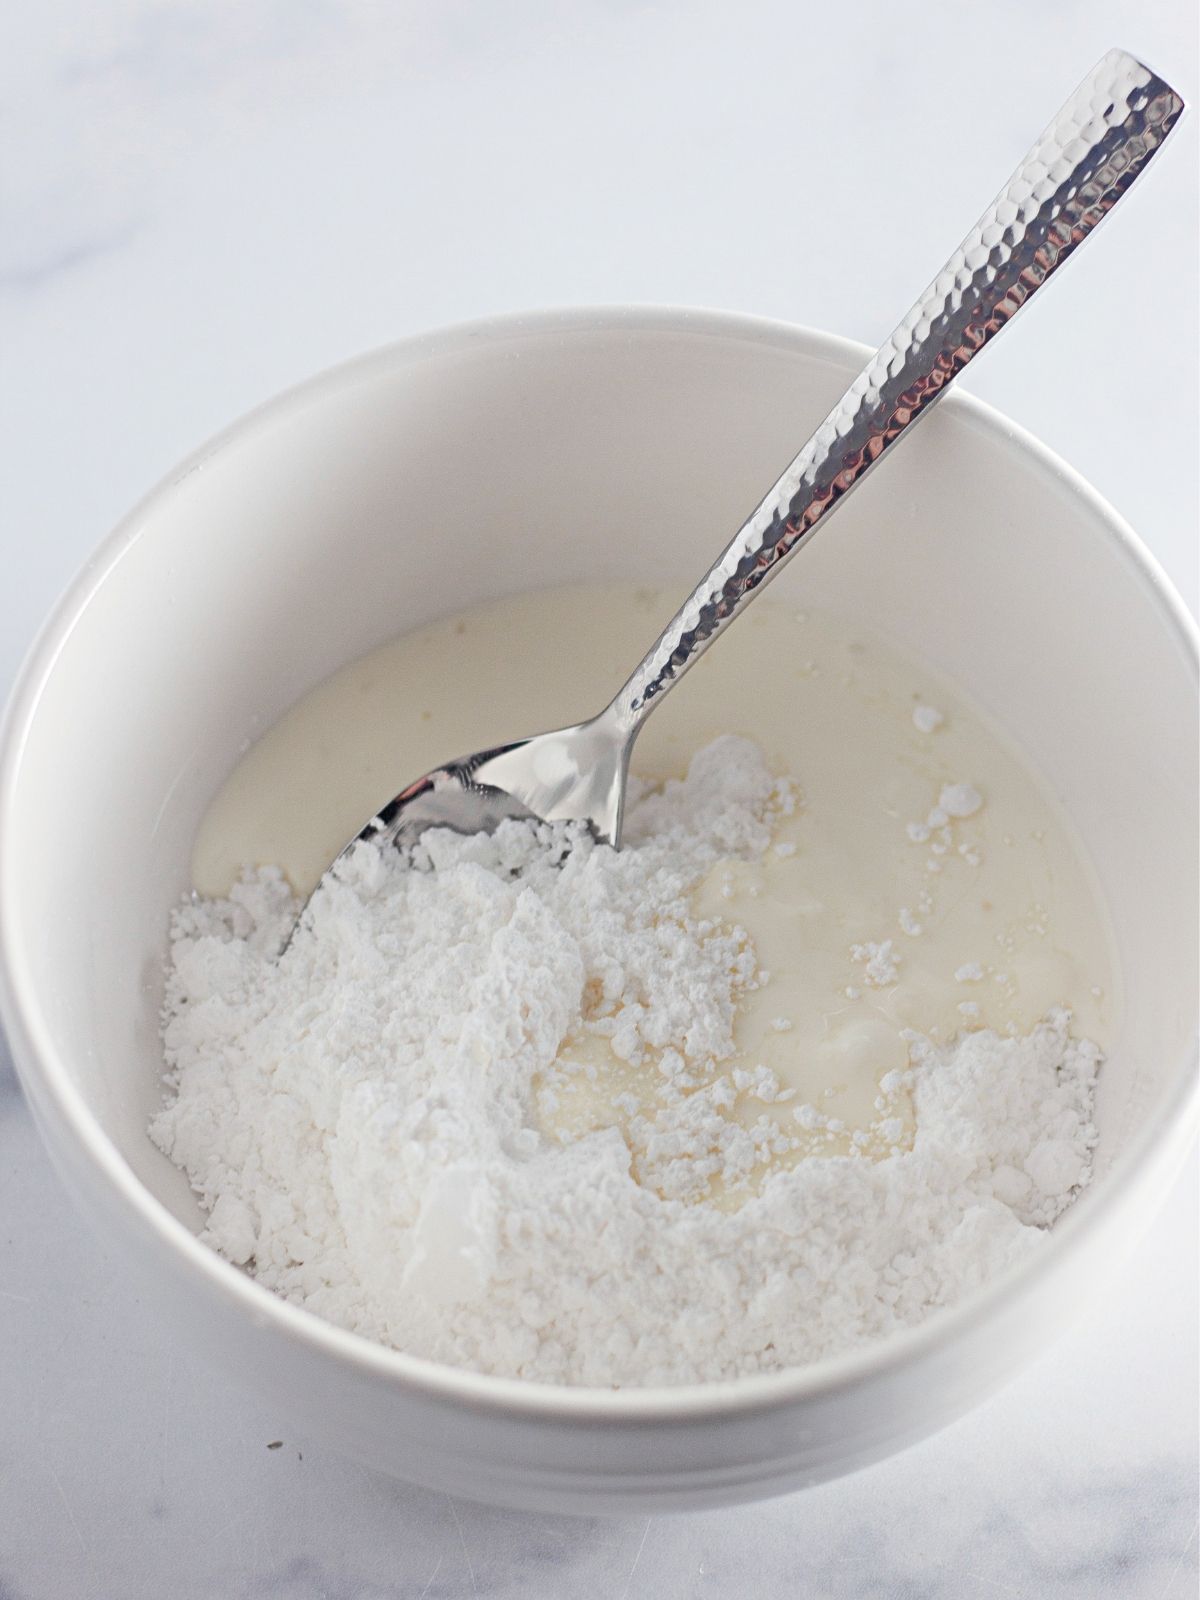 Powdered sugar glaze in white bowl with spoon.